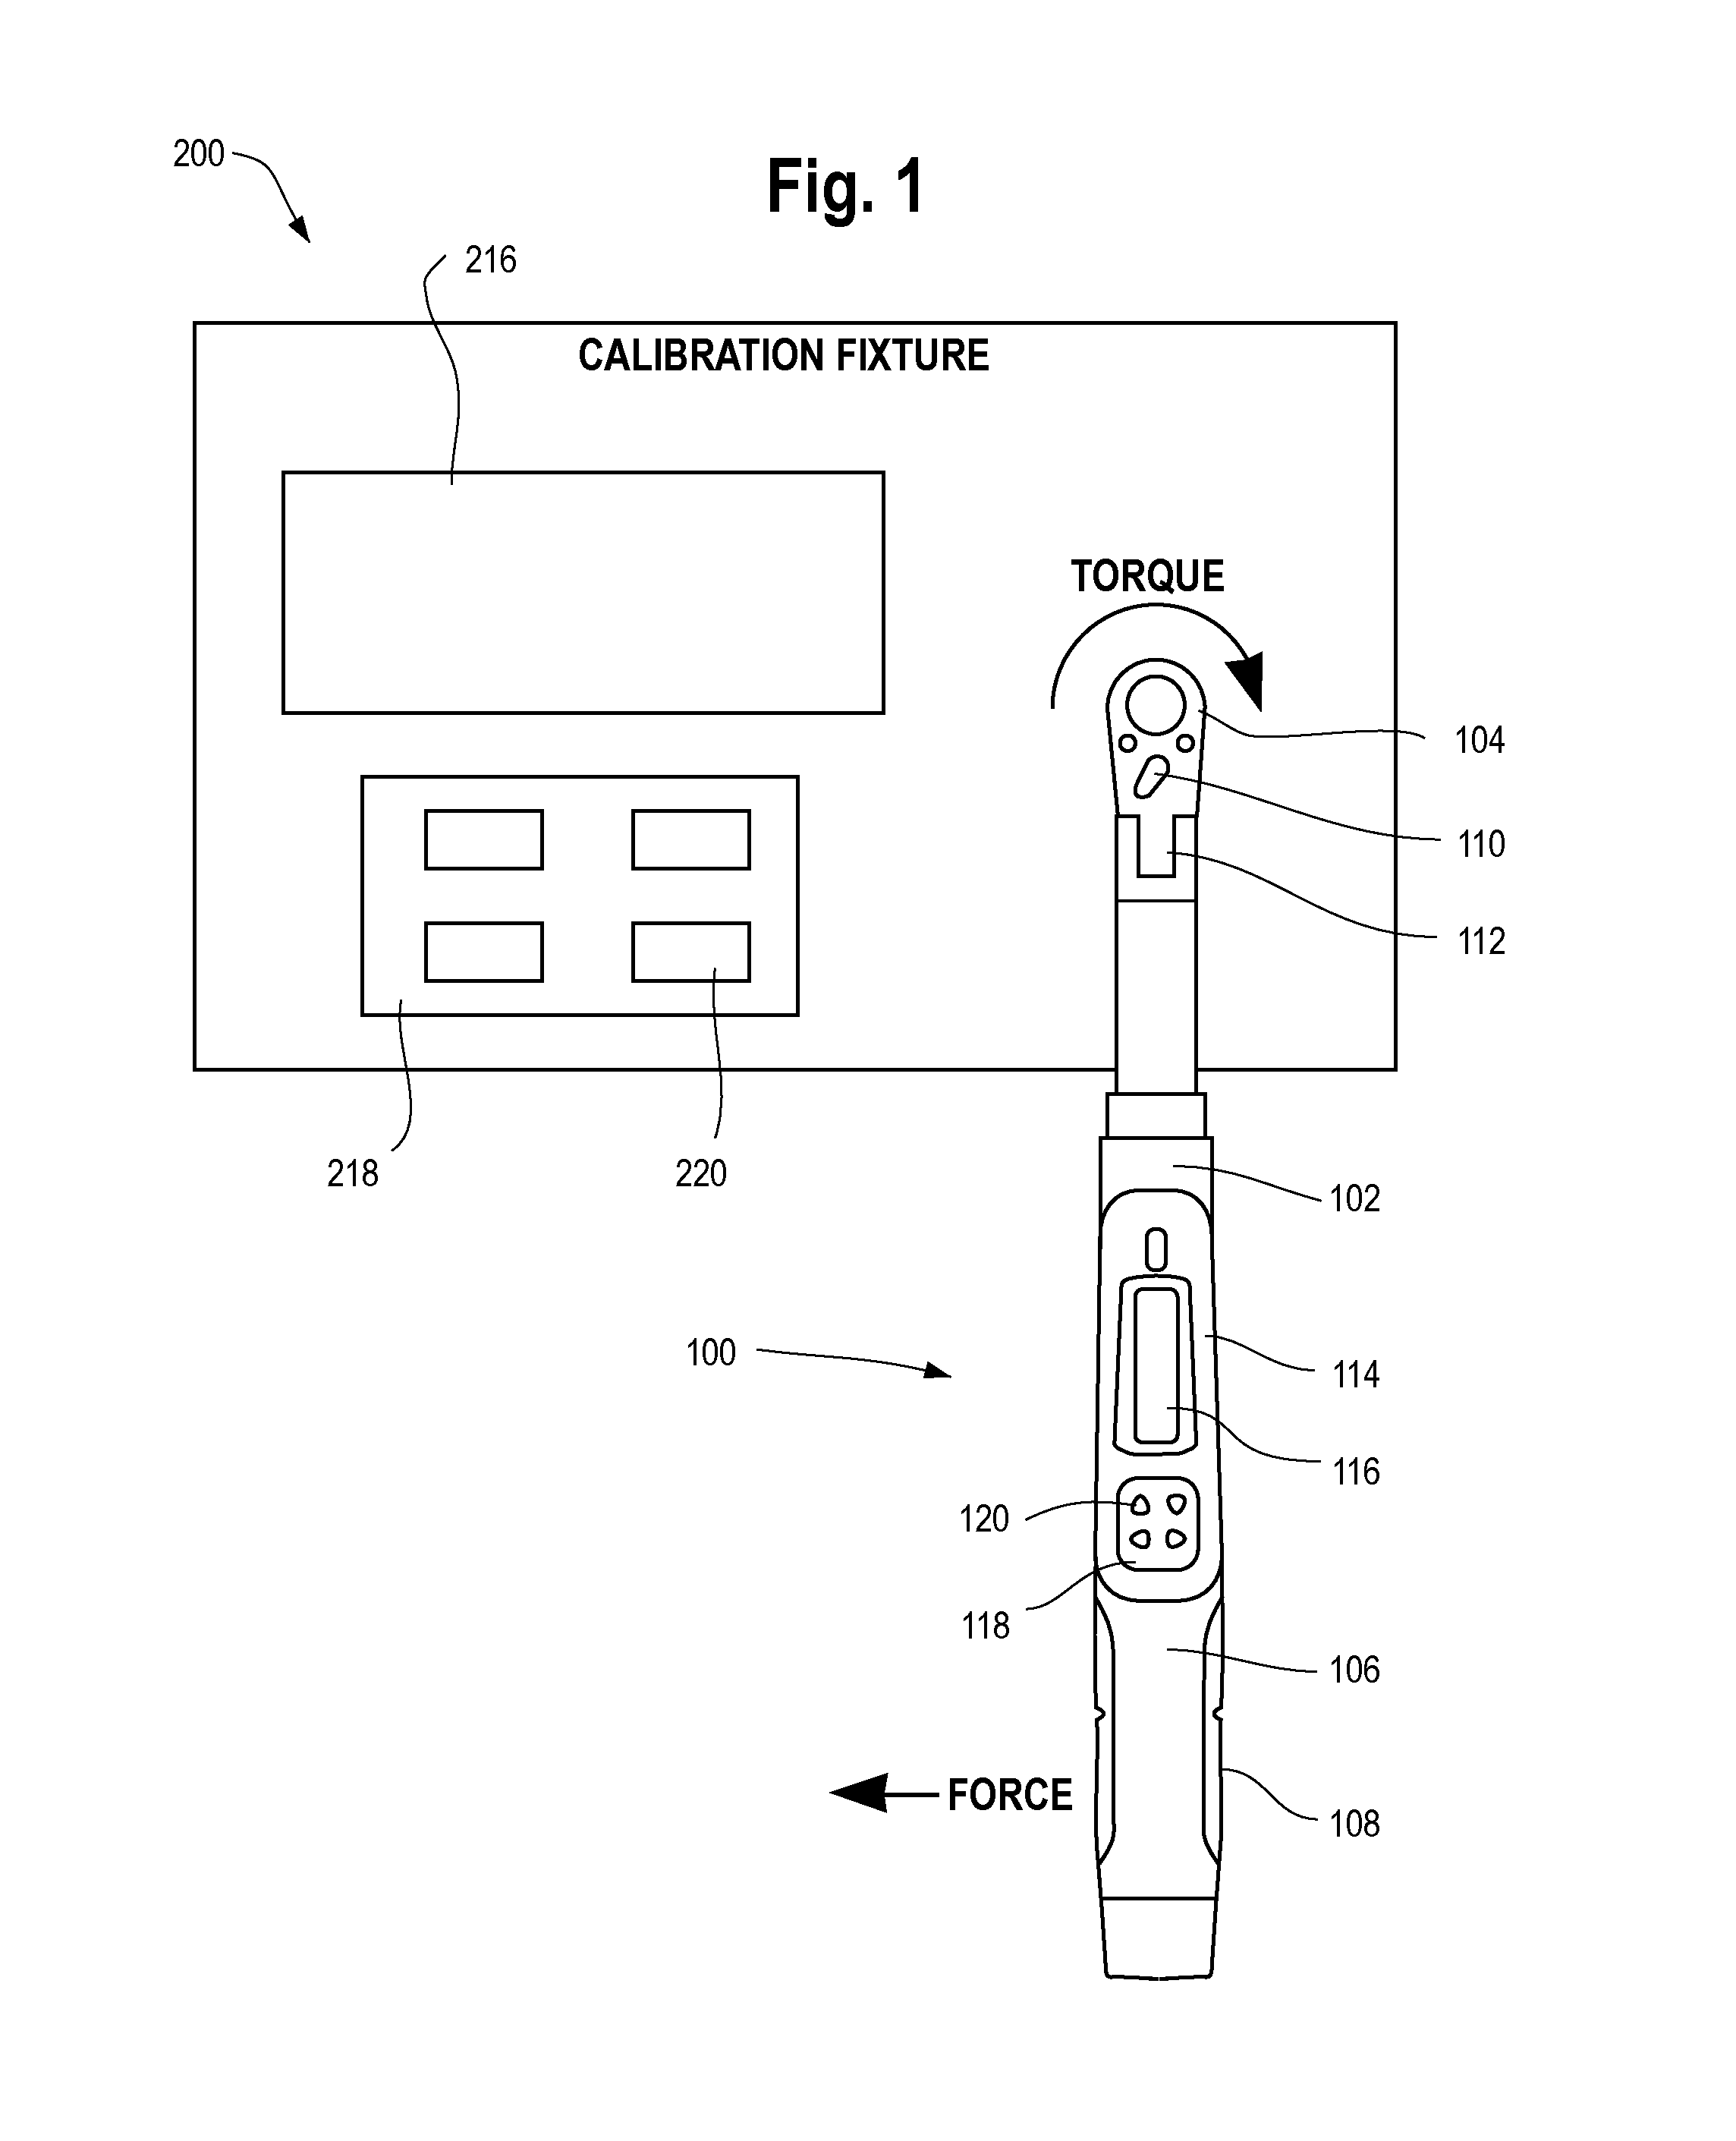 Method of calibrating torque using peak hold measurement on an electronic torque wrench